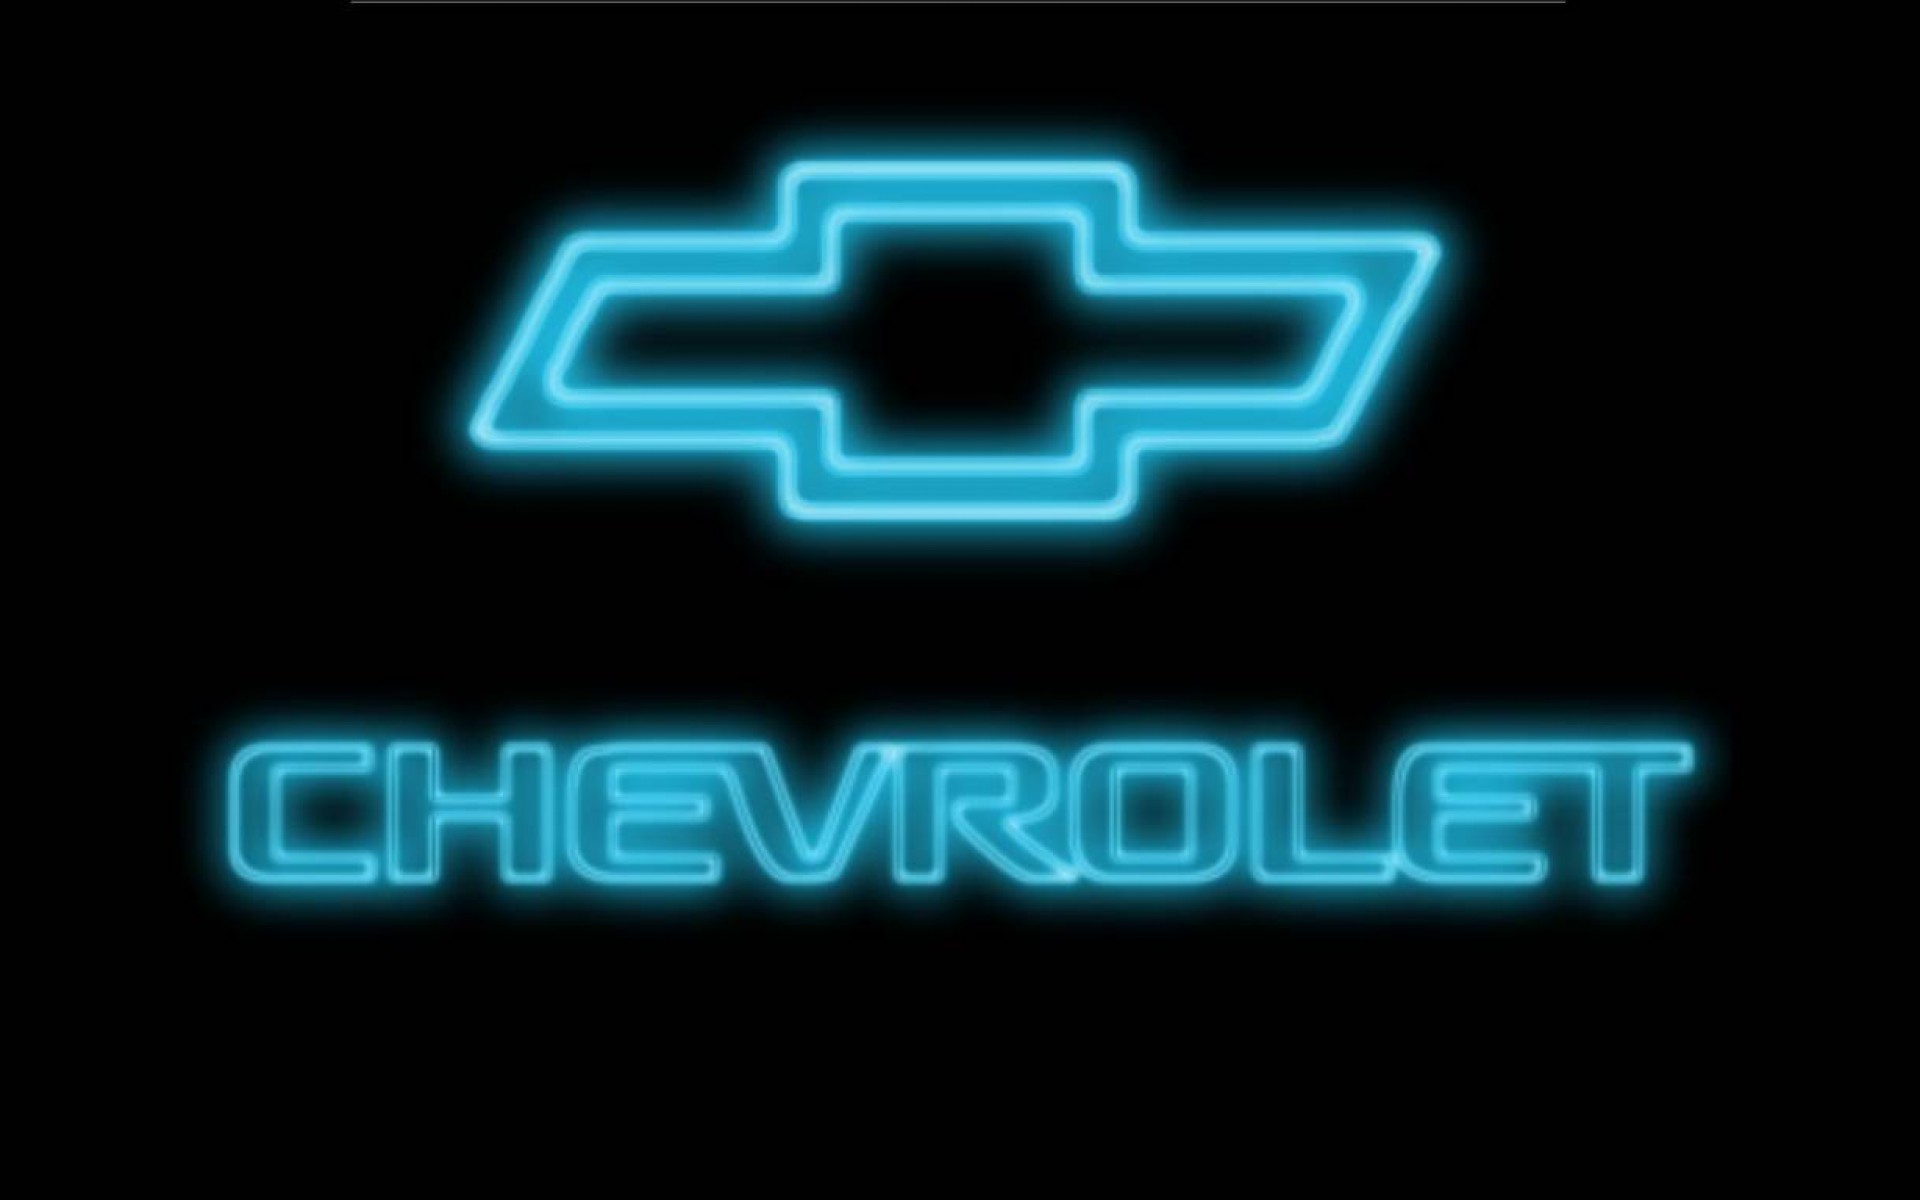 Chevy Logo iPhone Wallpaper (66+ images)